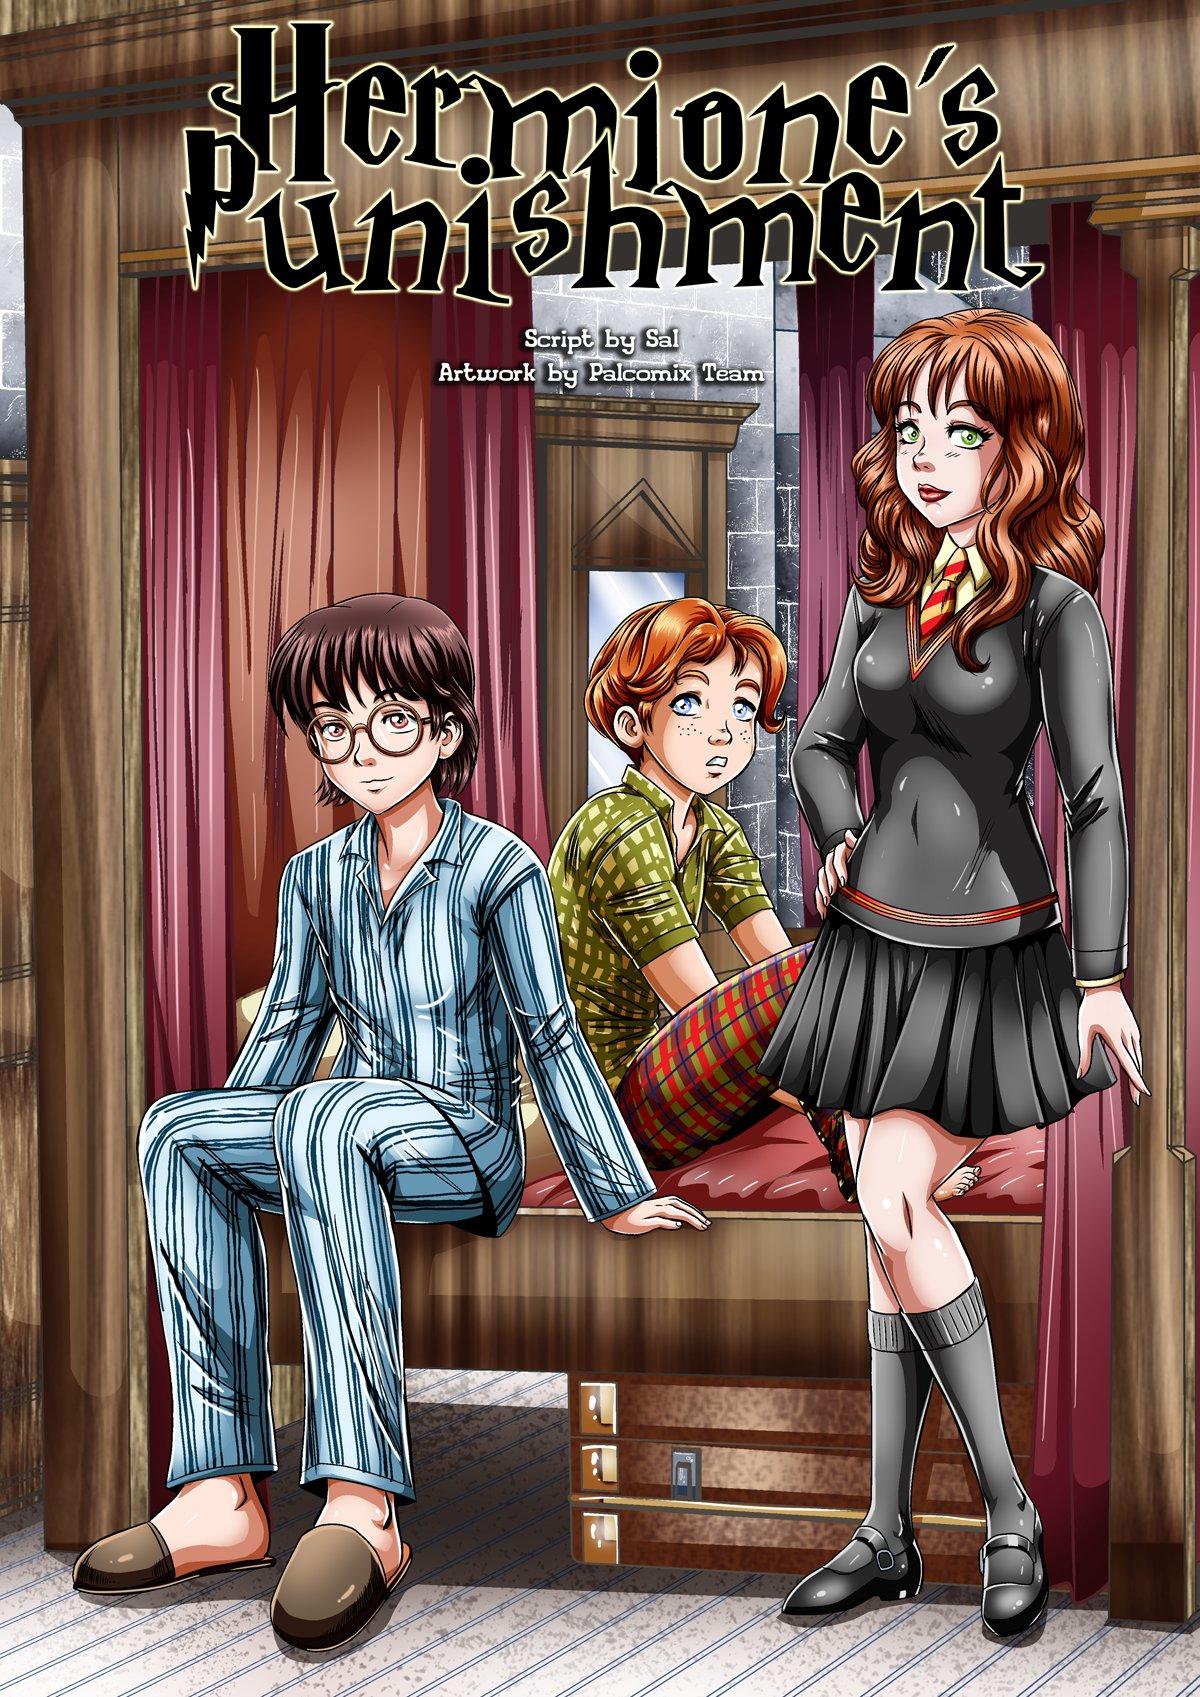 Potter hermione boobs comic harry